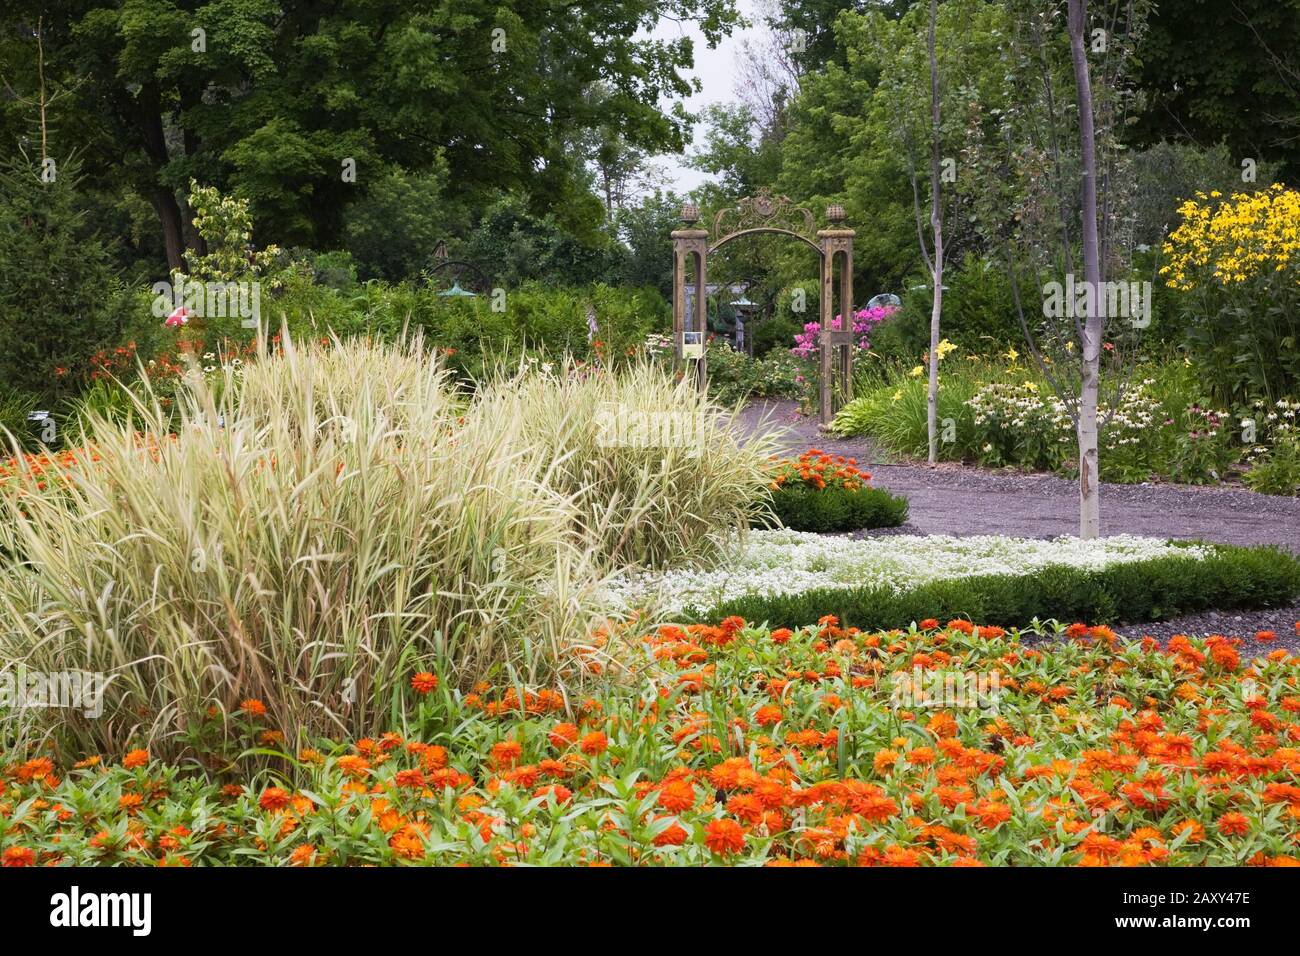 Orange Zinnia 'Double Zahara Fire' flowers and Phalaris arundinacea - Ribbon Grass plants in Discovery garden at the Route des Gerbes d'Angelica, Que. Stock Photo